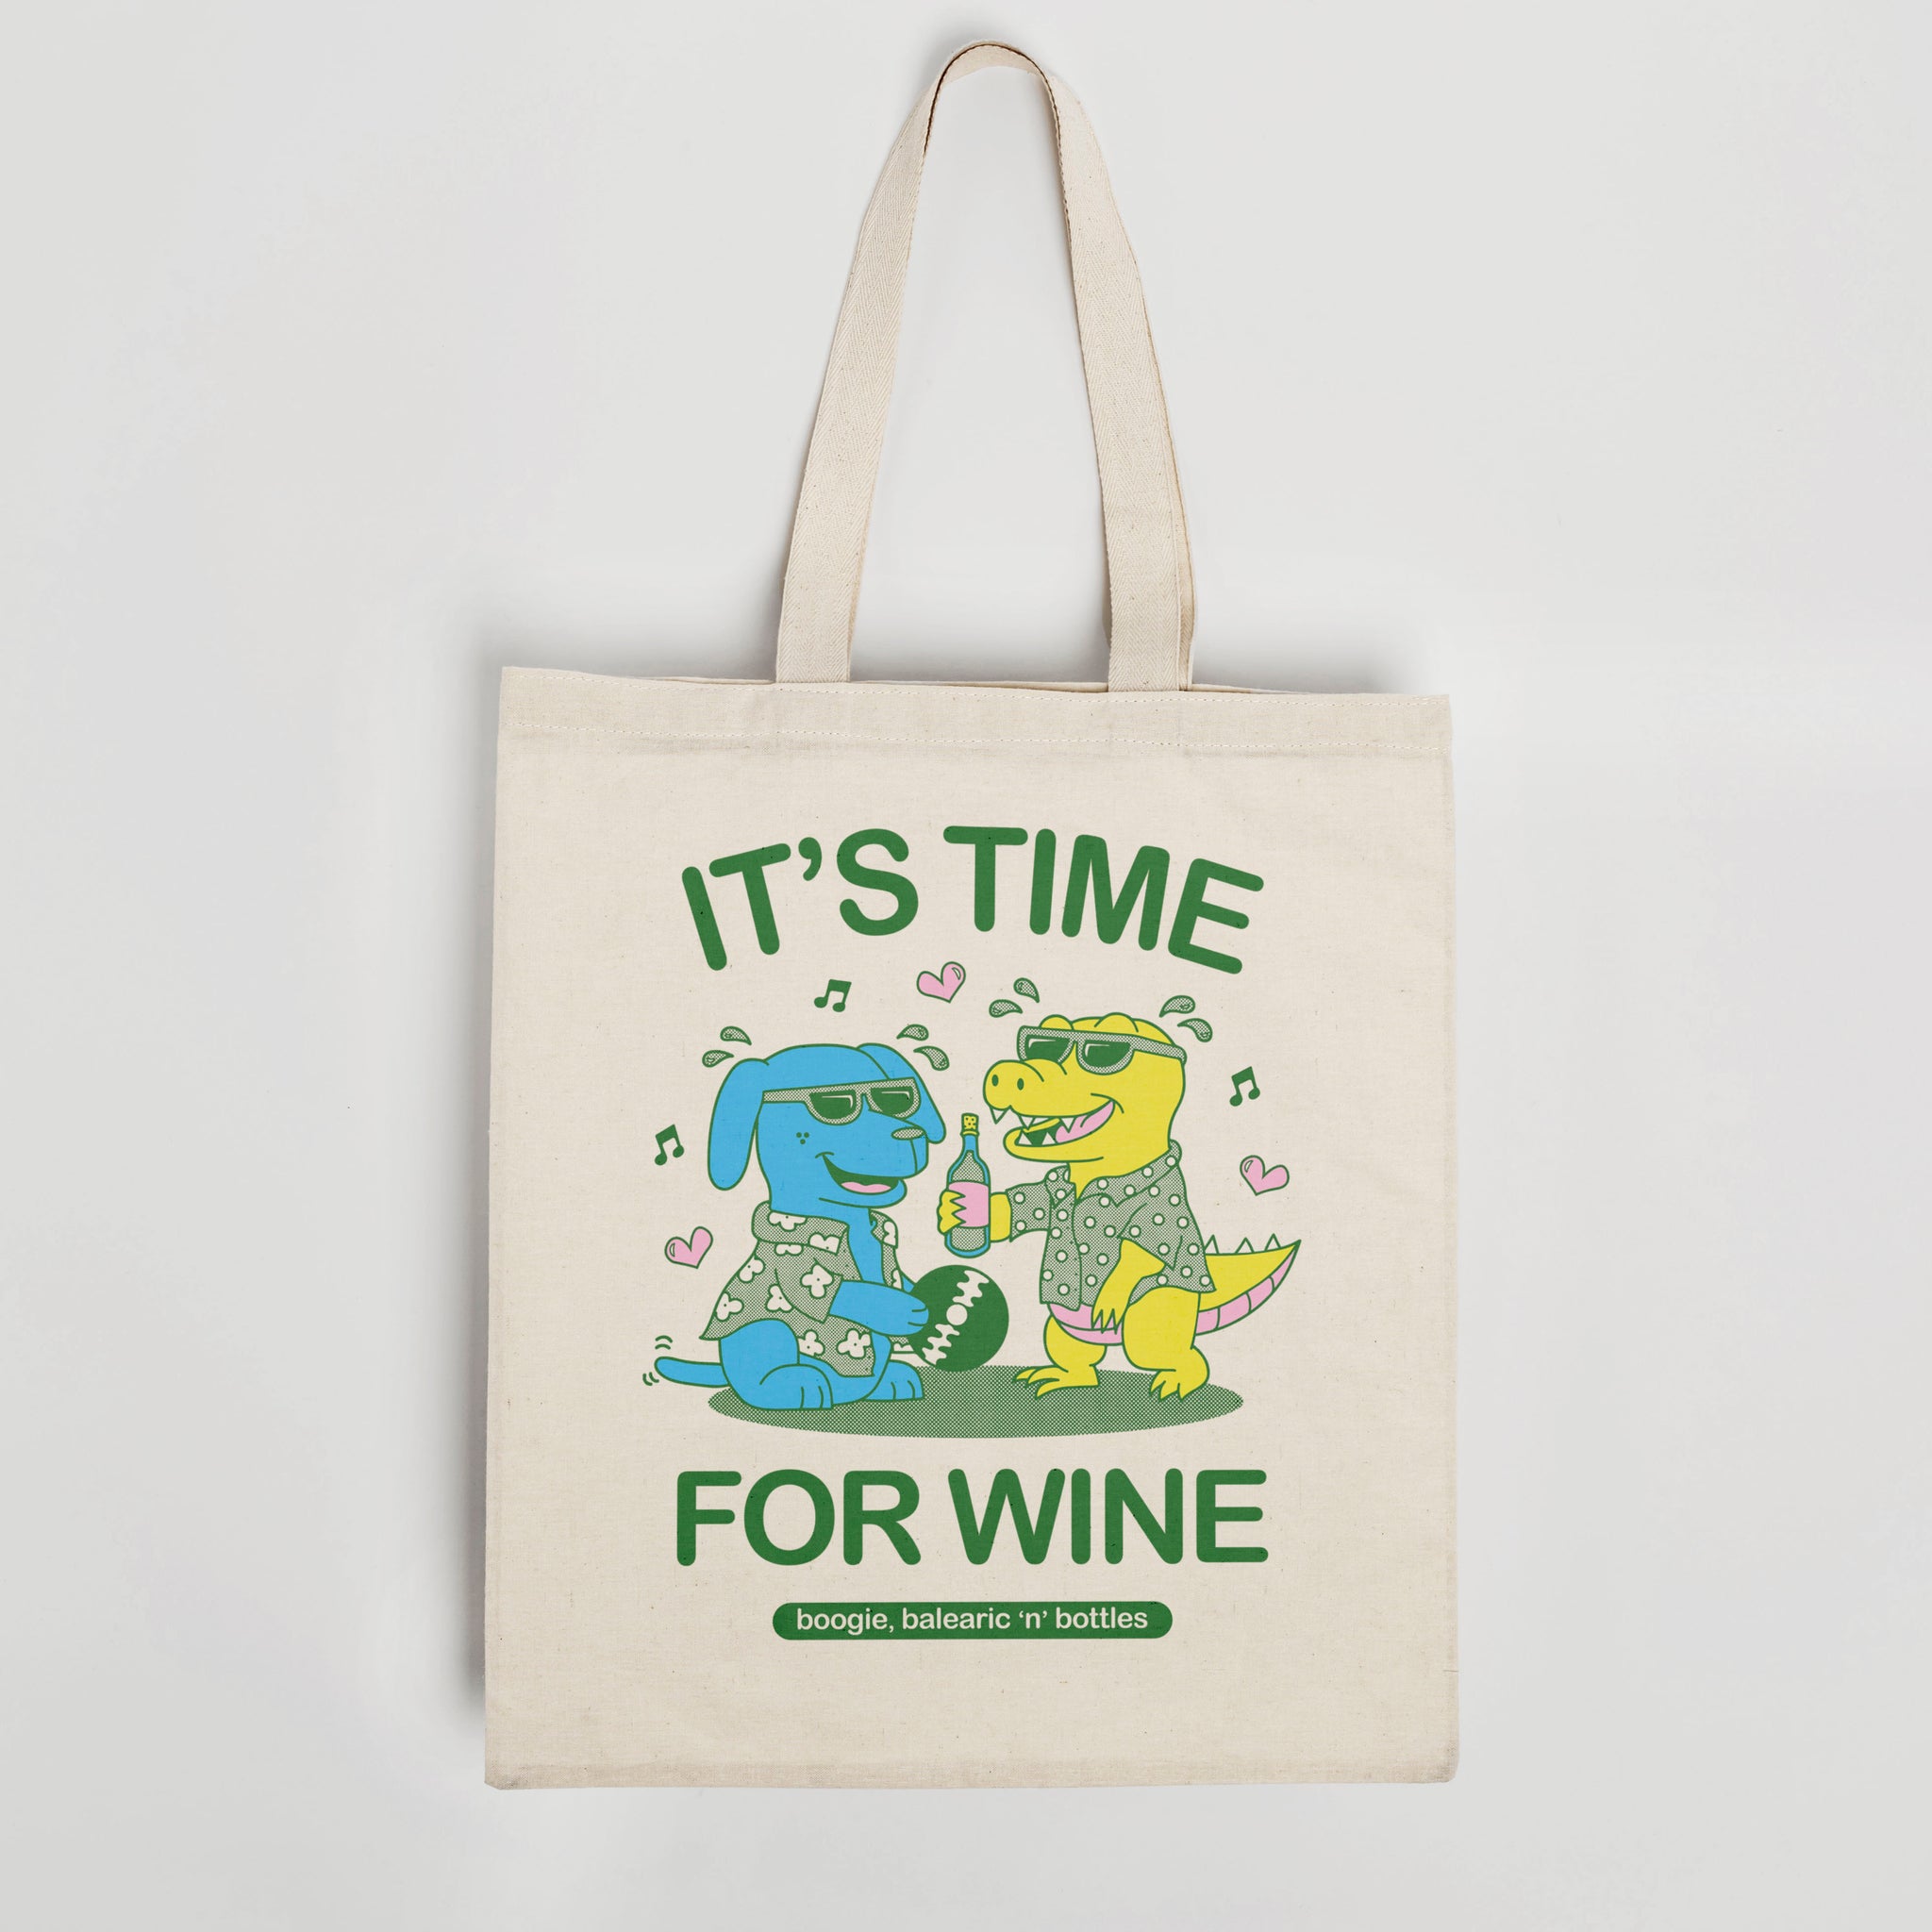 'It's Time For Wine' organic cotton canvas tote bag